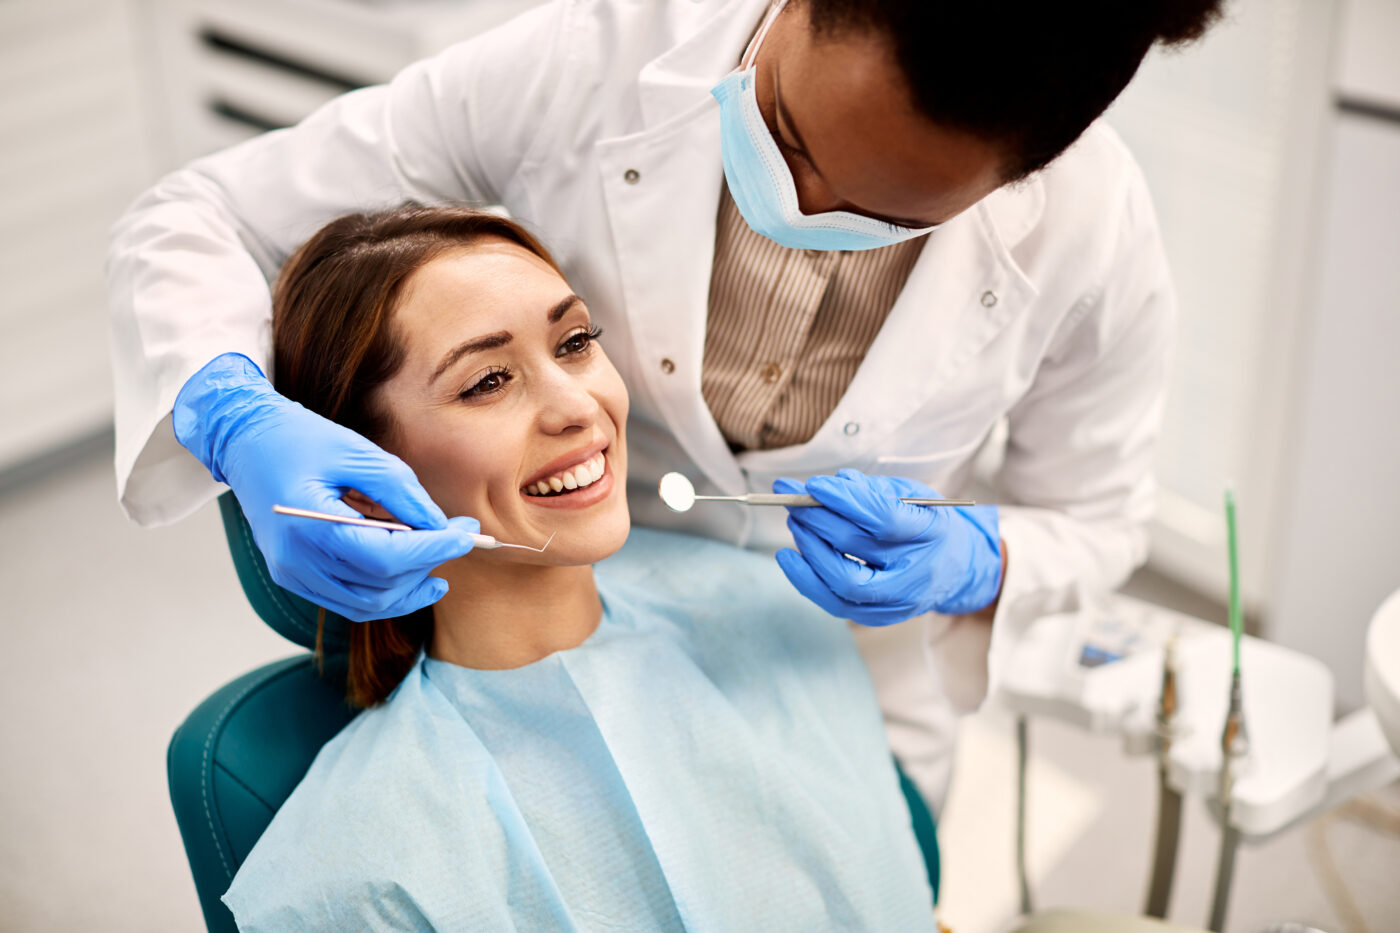 How To Kickstart Your Career If You're Interested In Dentistry